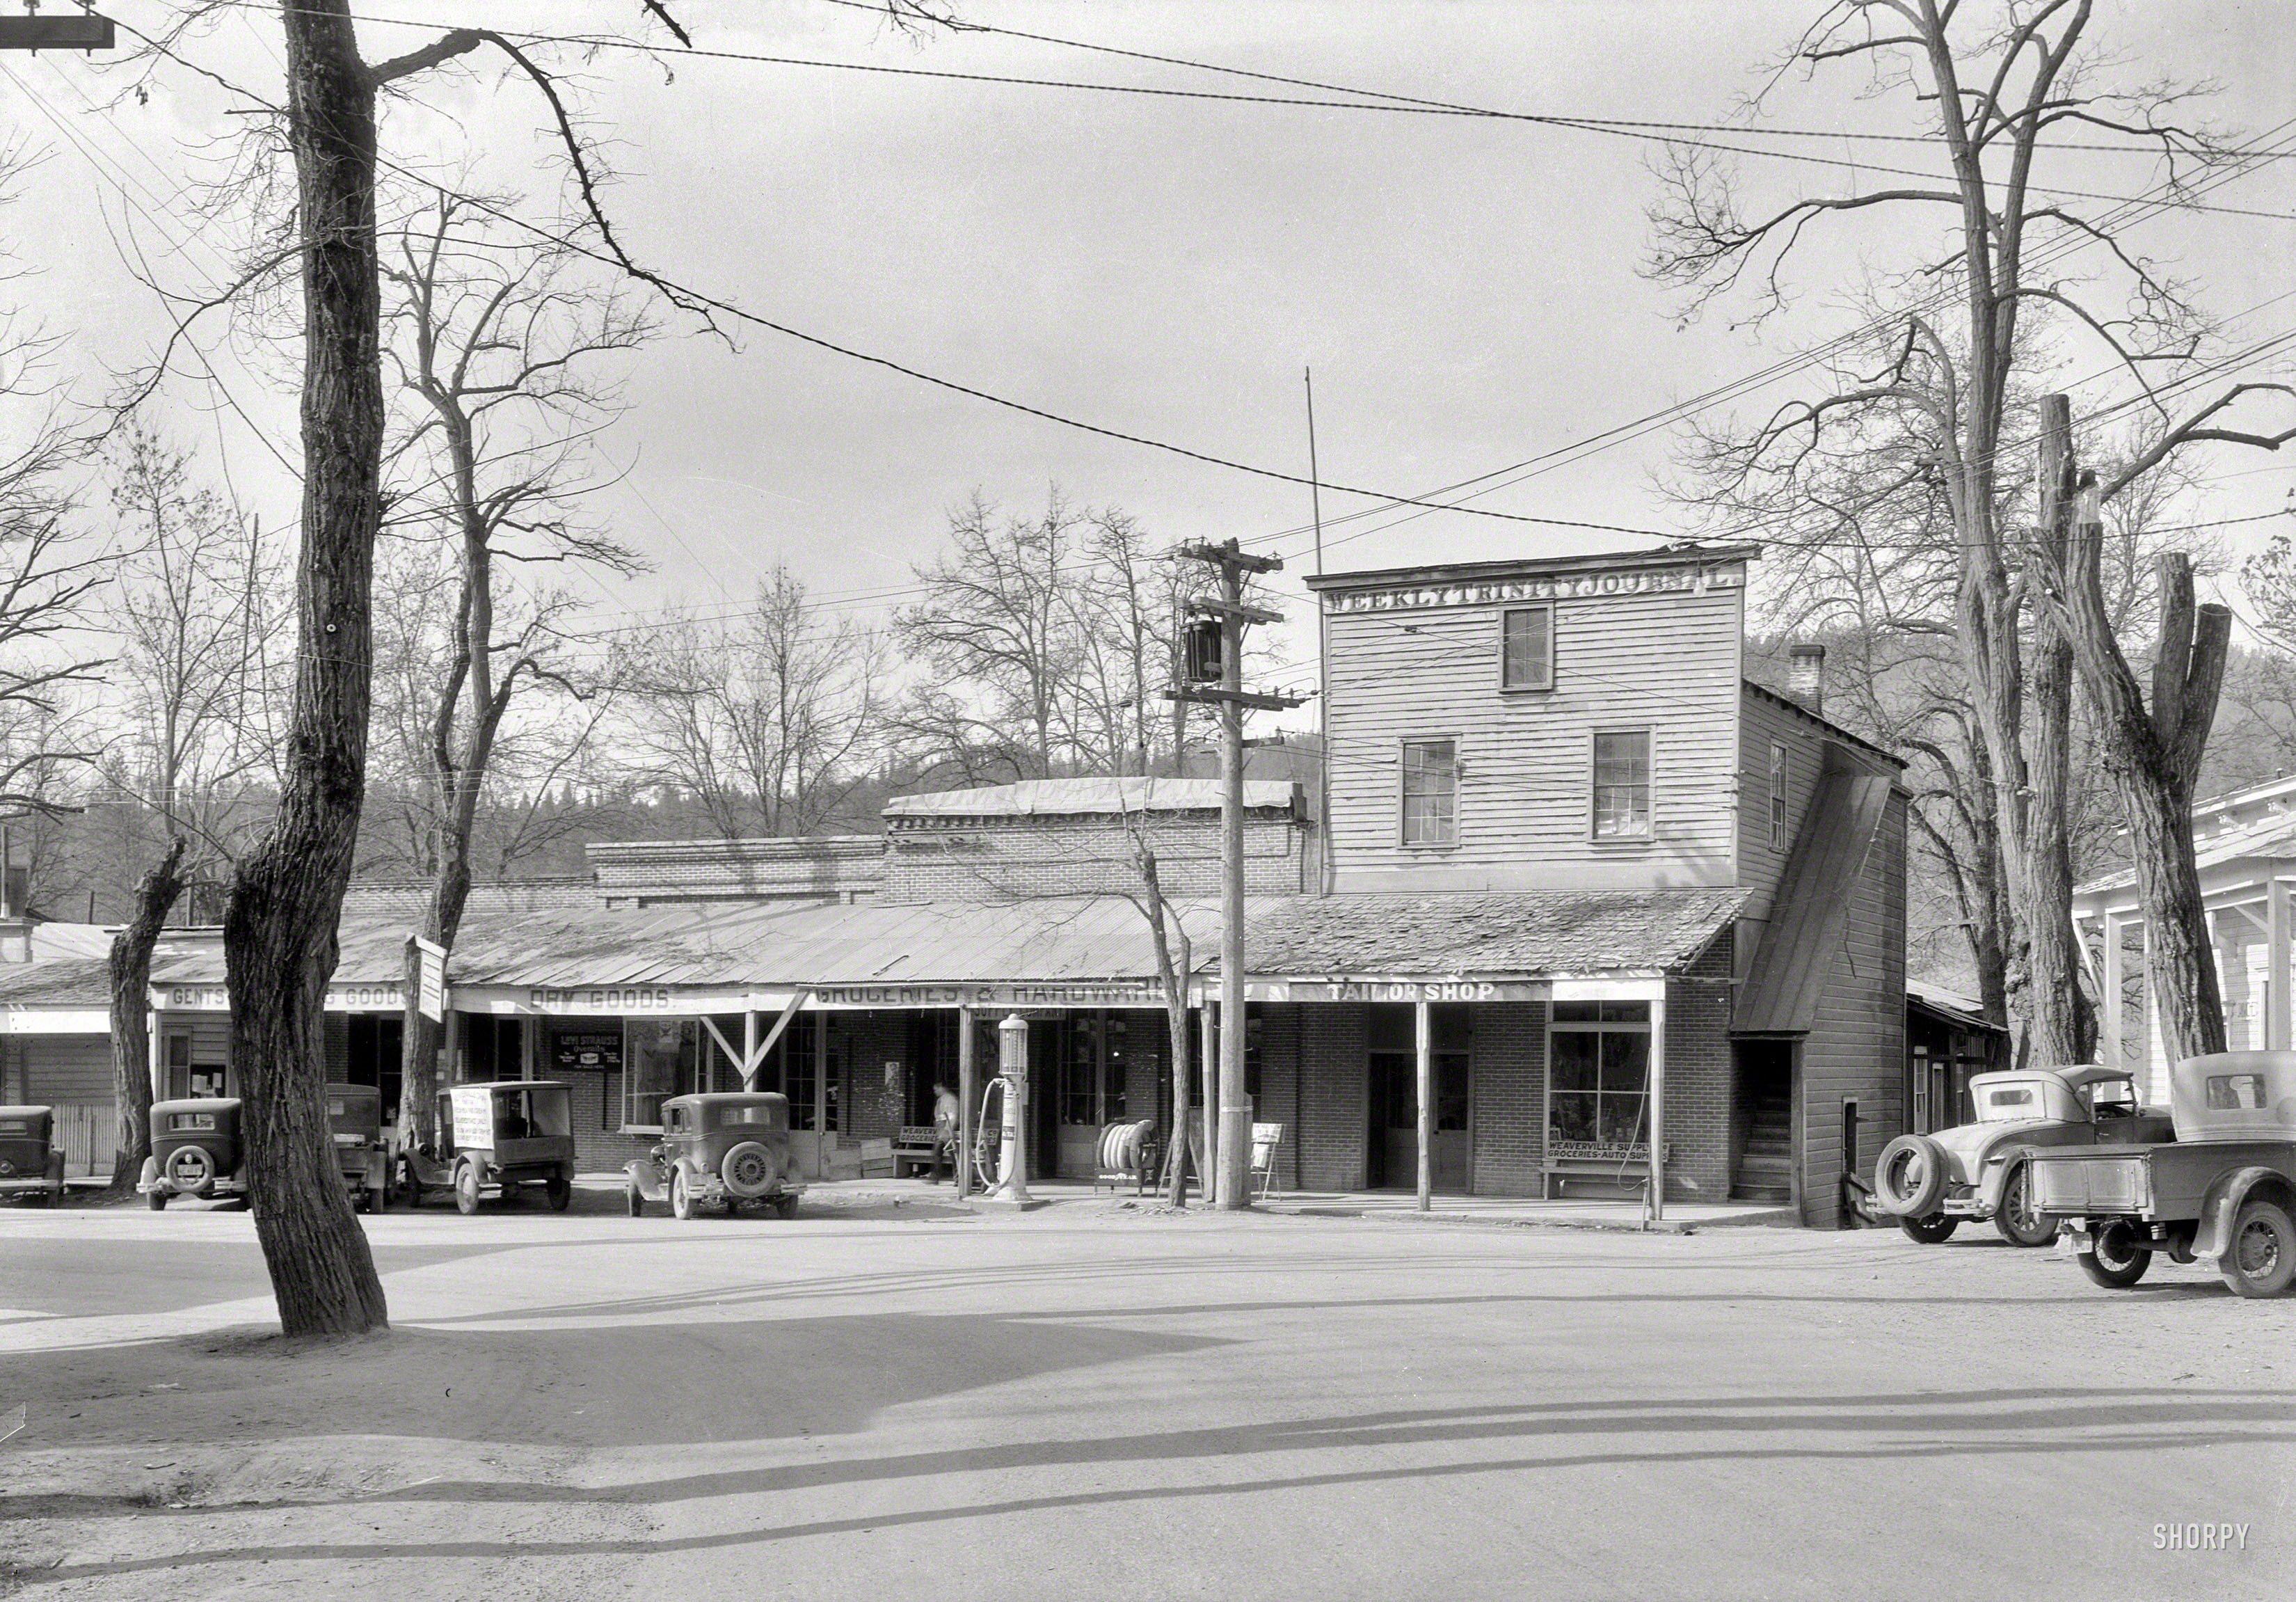 March 10, 1934 "Weaverville, Trinity County, California. General view looking west." Not much evidence of a Great Depression other than the NRA sign in a store window. Photo by Roger Sturtevant for the Historic American Buildings Sur&shy;vey. We wonder if he ever crossed paths with Dorothea Lange. View full size.